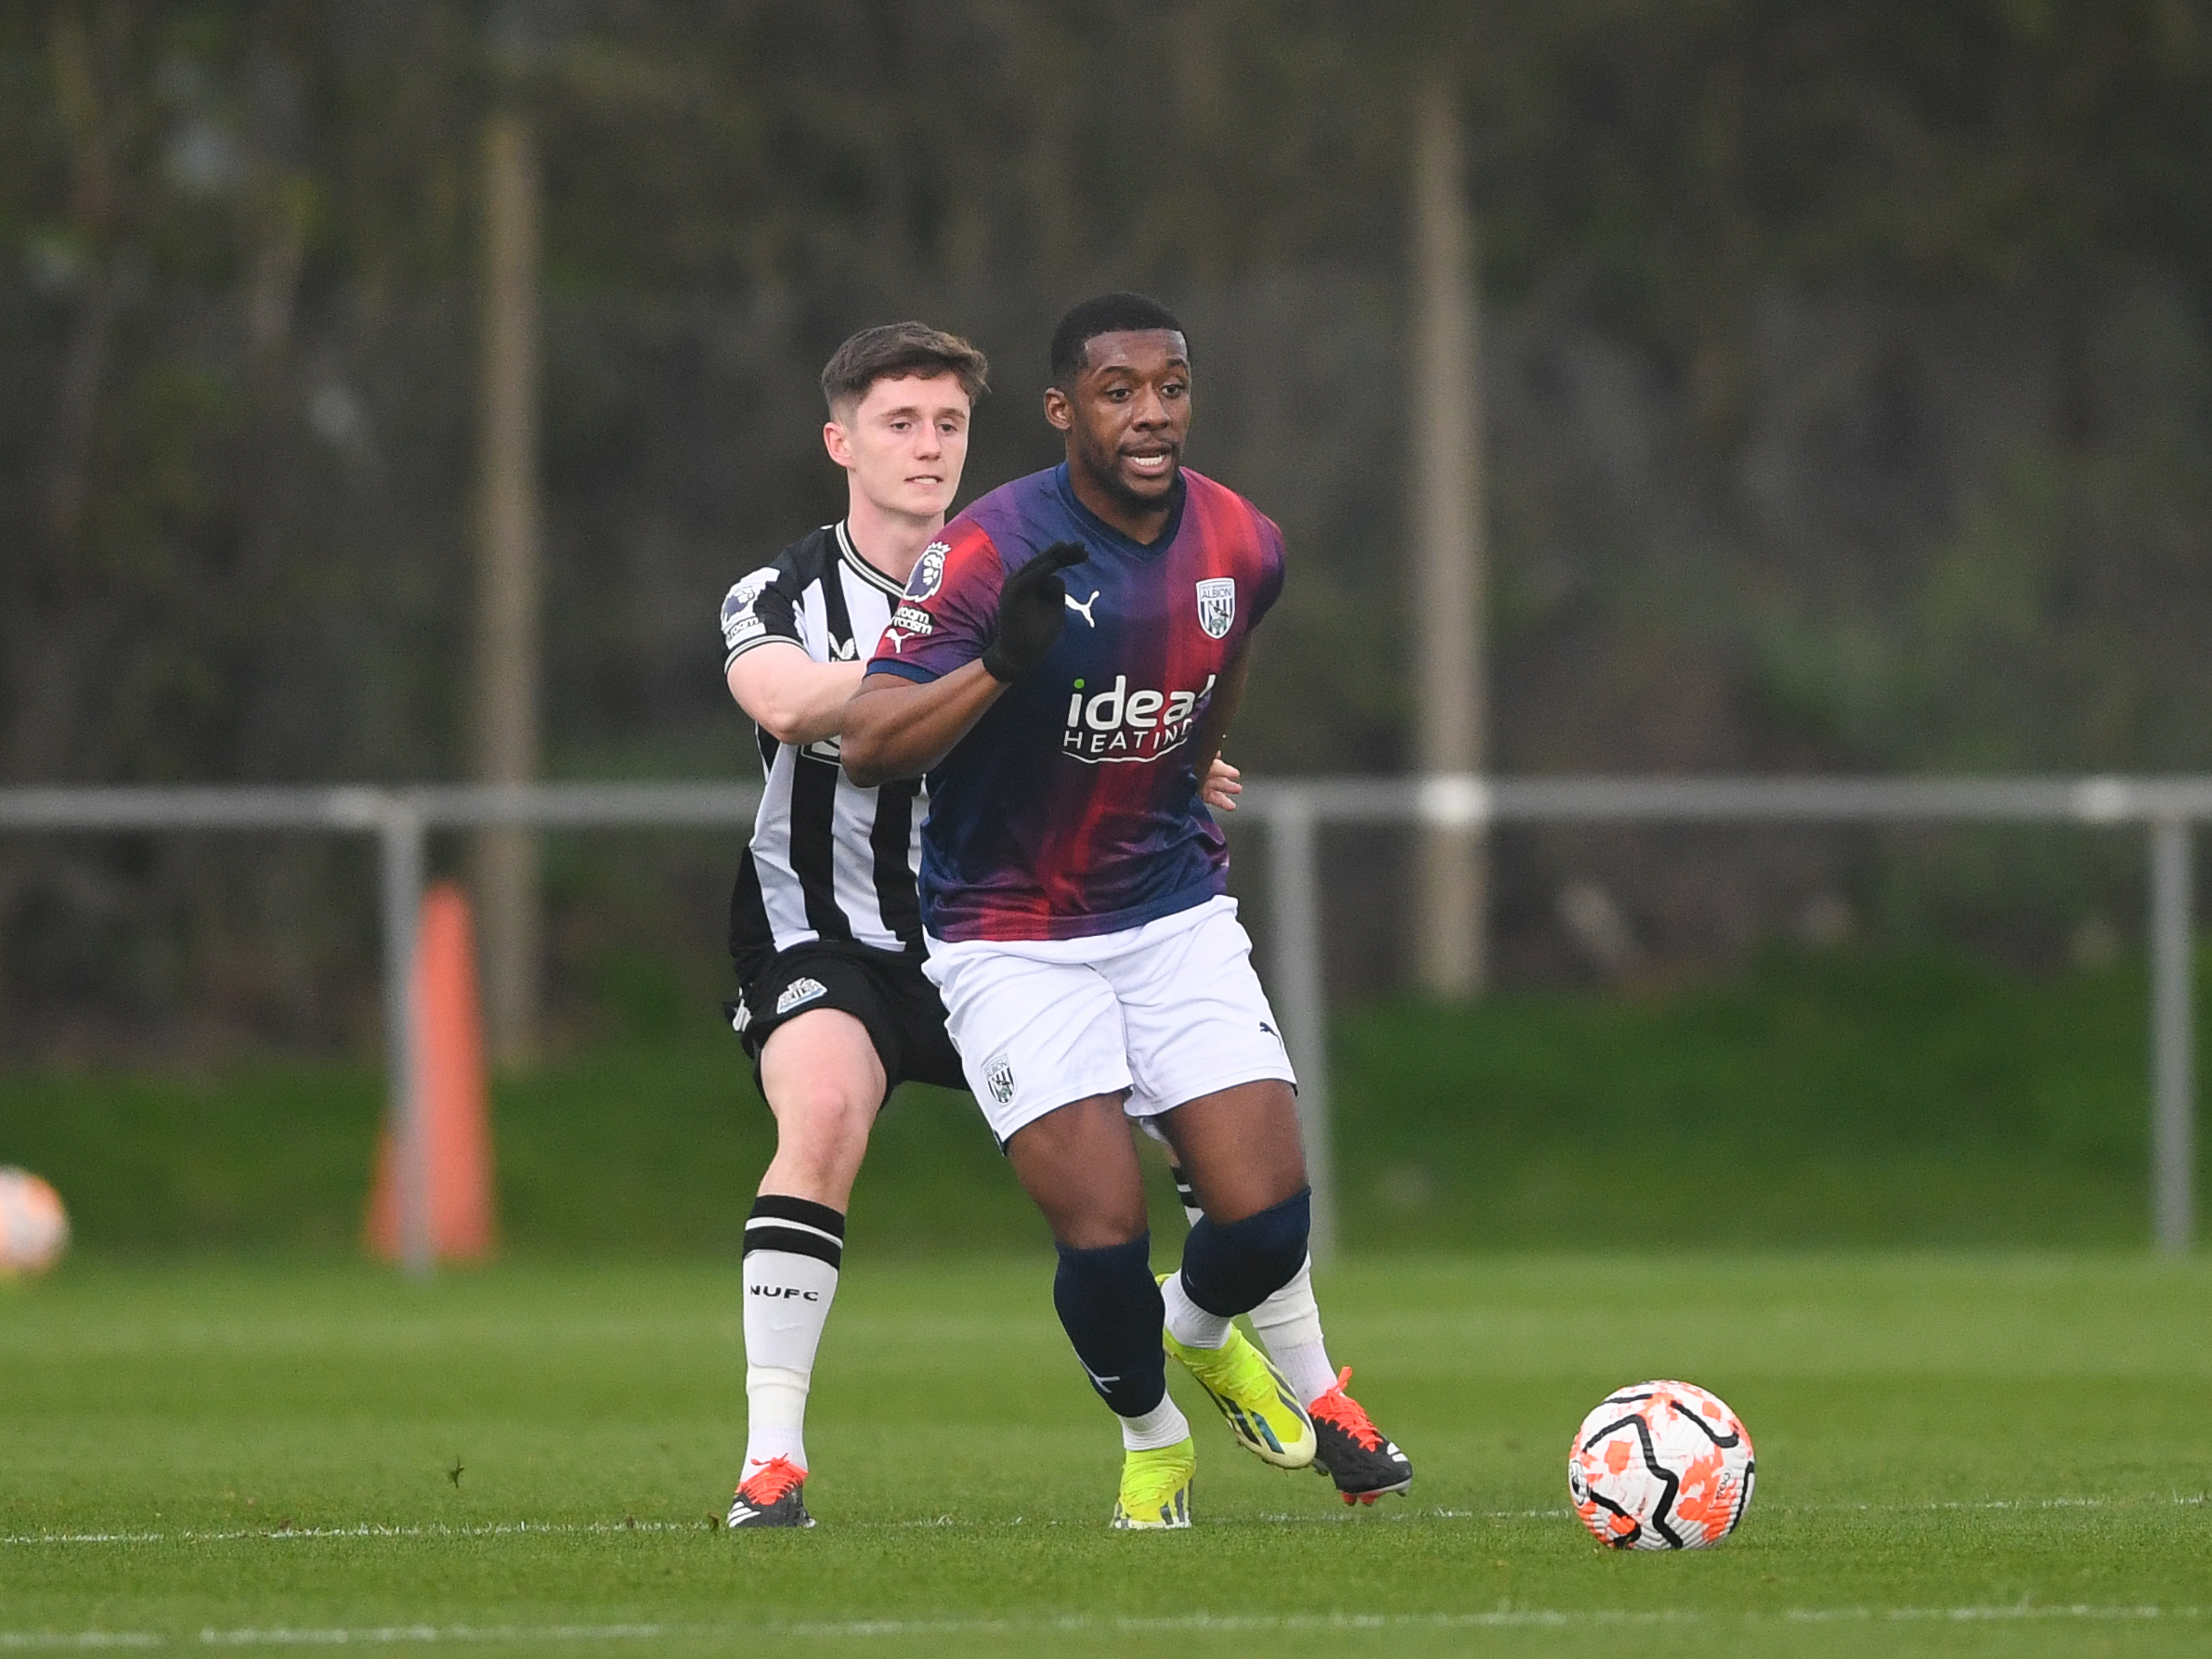 A photo of Jovan Malcolm, in the 23/24 red and blue kit, in action for Albion's PL2 team v Newcastle